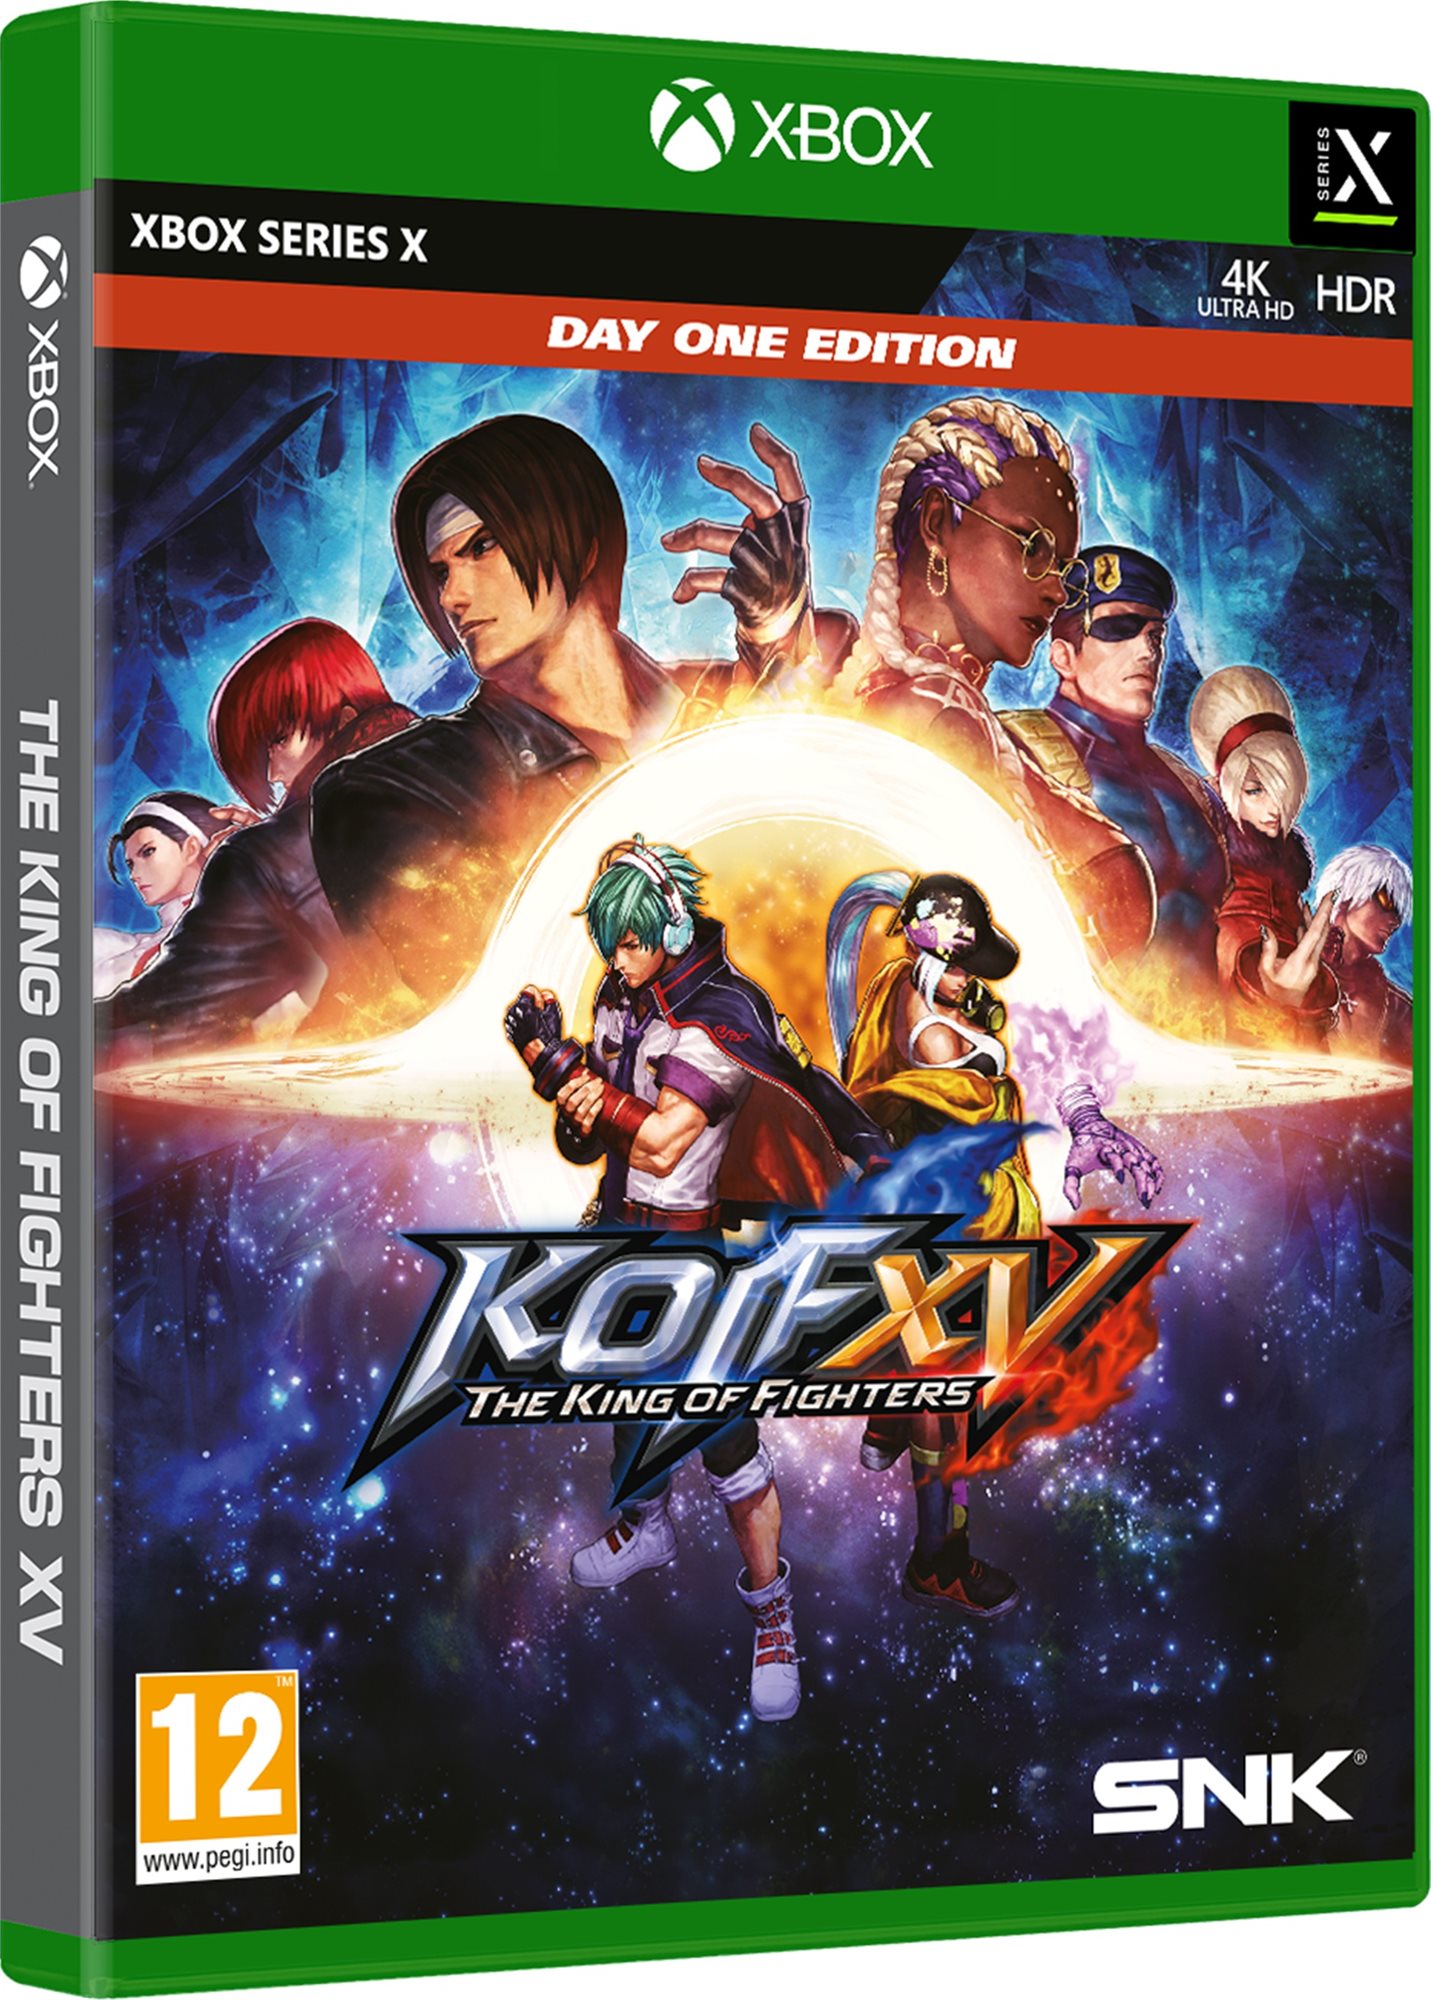 The King of Fighters XV: Day One Edition - Xbox Series